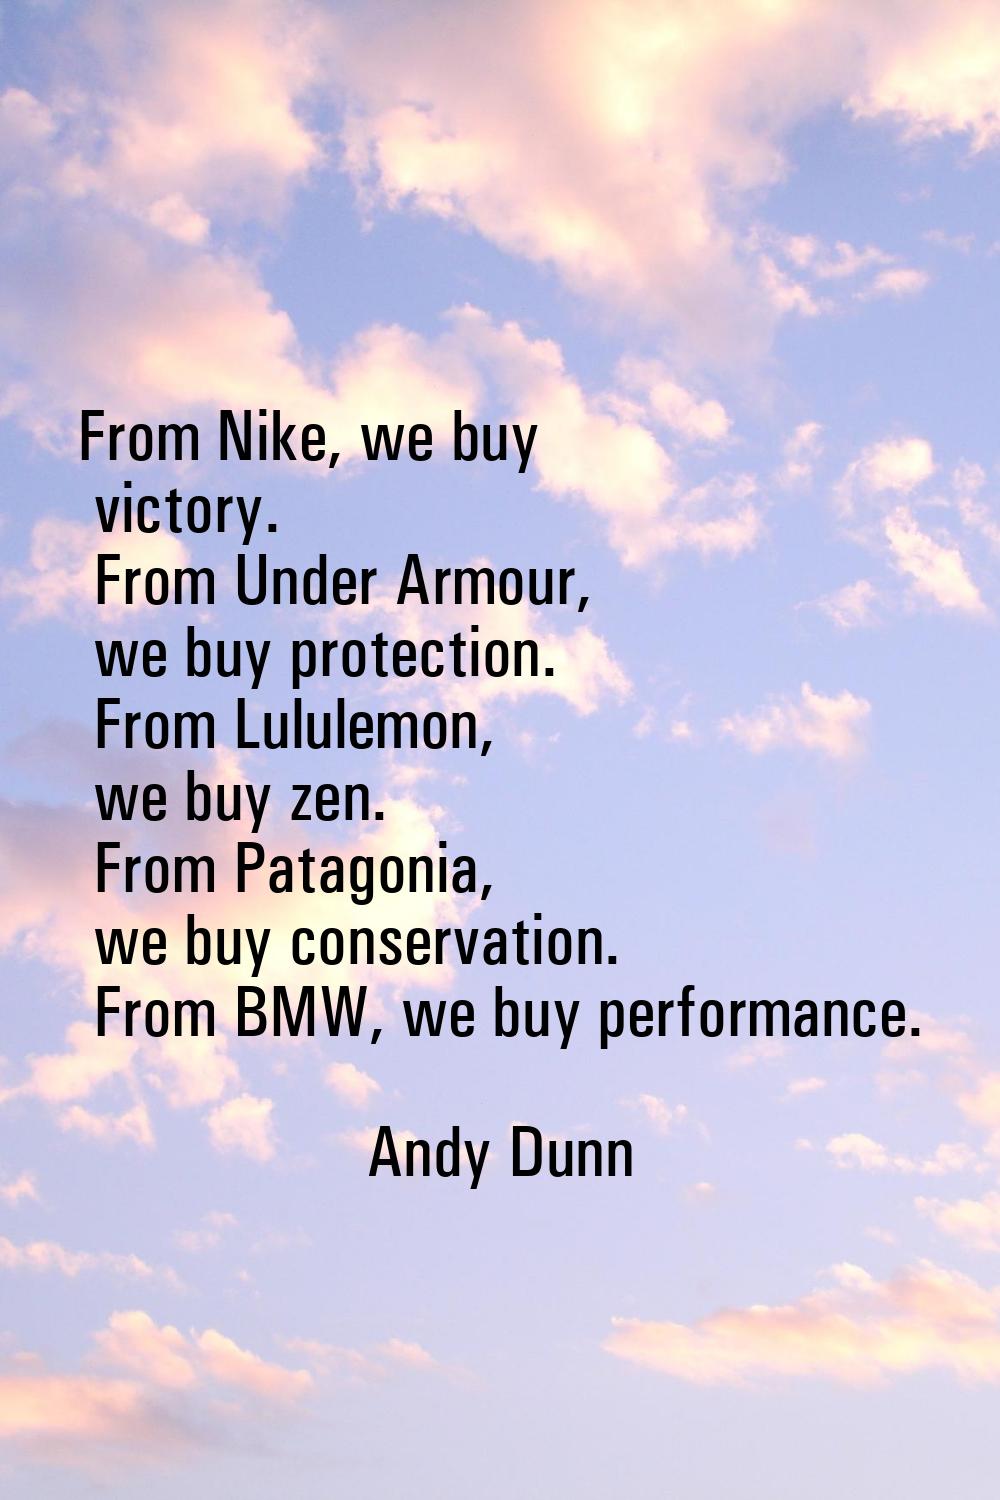 From Nike, we buy victory. From Under Armour, we buy protection. From Lululemon, we buy zen. From P